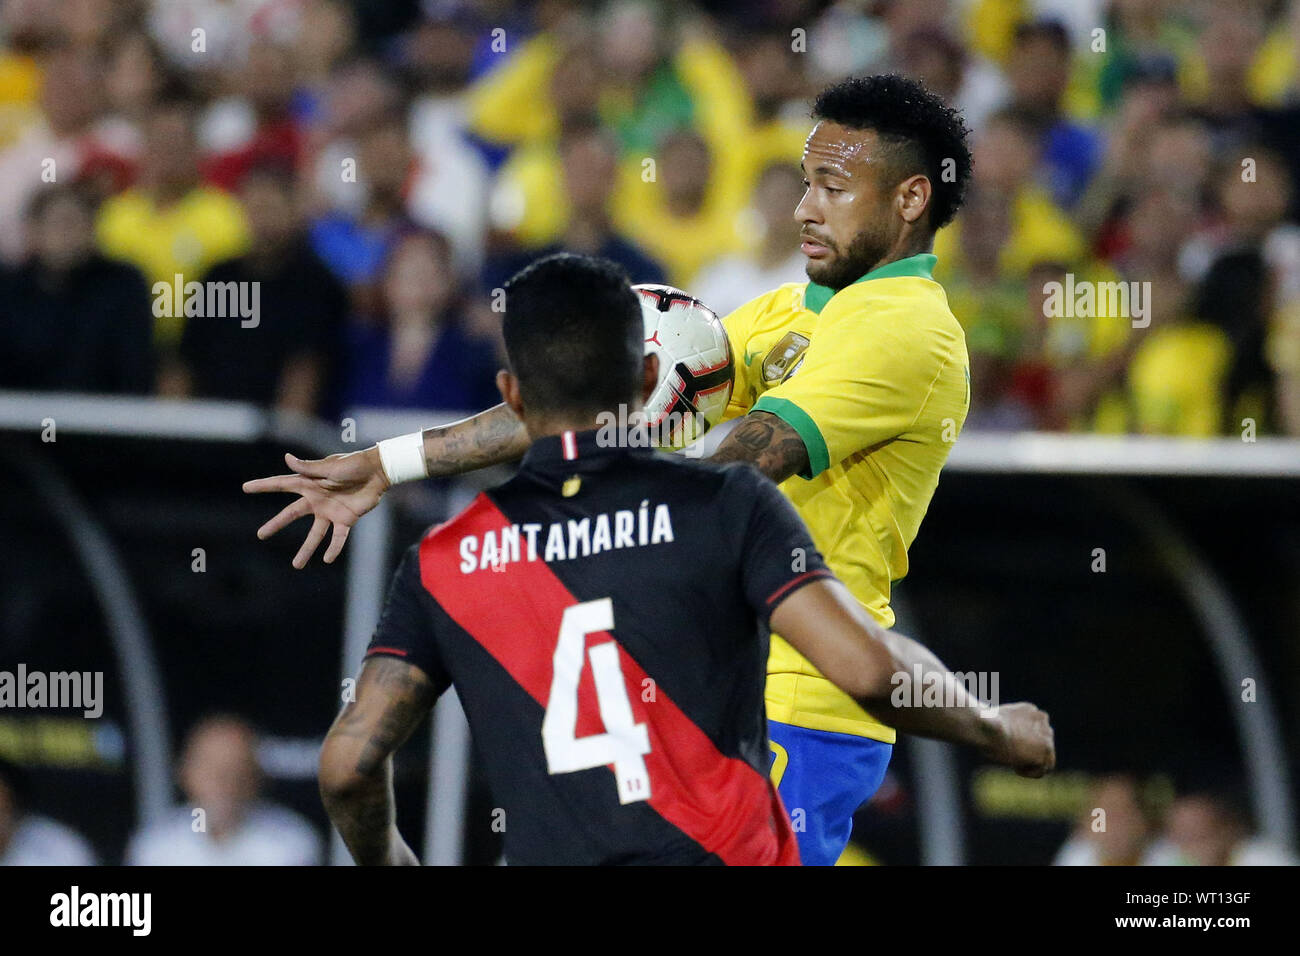 Los Angeles, California, USA. 10th Sep, 2019. Brazil forward Neymar Jr. (10) controls the ball Peru defender Anderson Santamaria (4) during an International Friendly Soccer match between Brazil and Peru at the Los Angeles Memorial Coliseum in Los Angeles on Tuesday, September 10, 2019. Credit: Ringo Chiu/ZUMA Wire/Alamy Live News Stock Photo